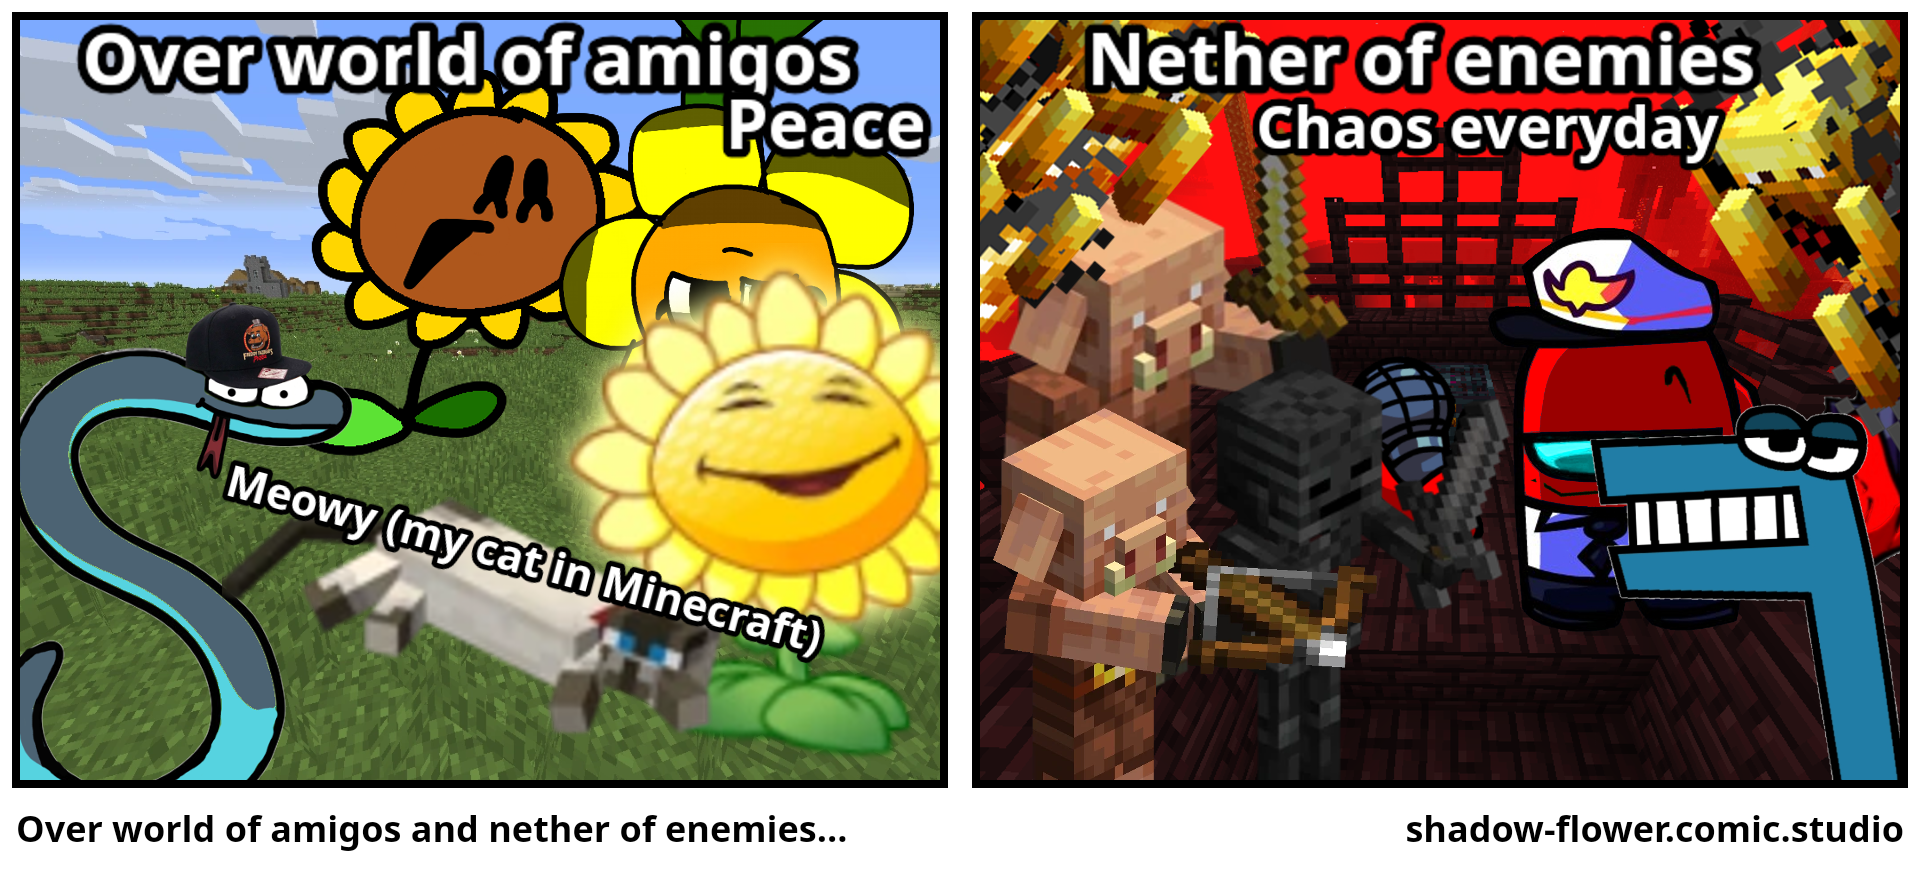 Over world of amigos and nether of enemies... 